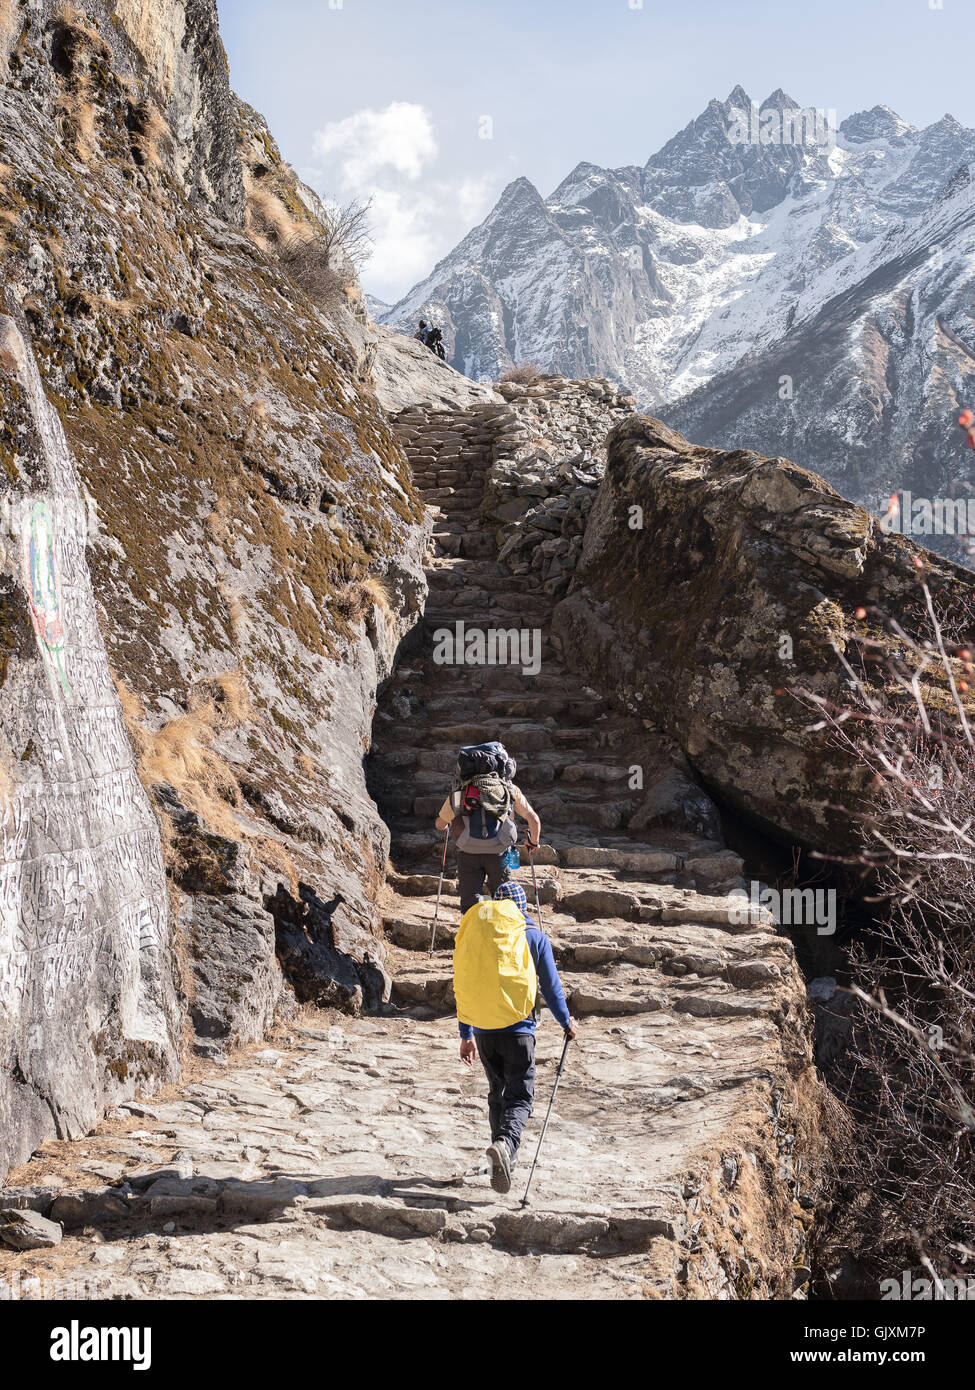 Backpackers make their way up steps as they journey through Nepal's Everest Base Camp in the middle of winter Stock Photo